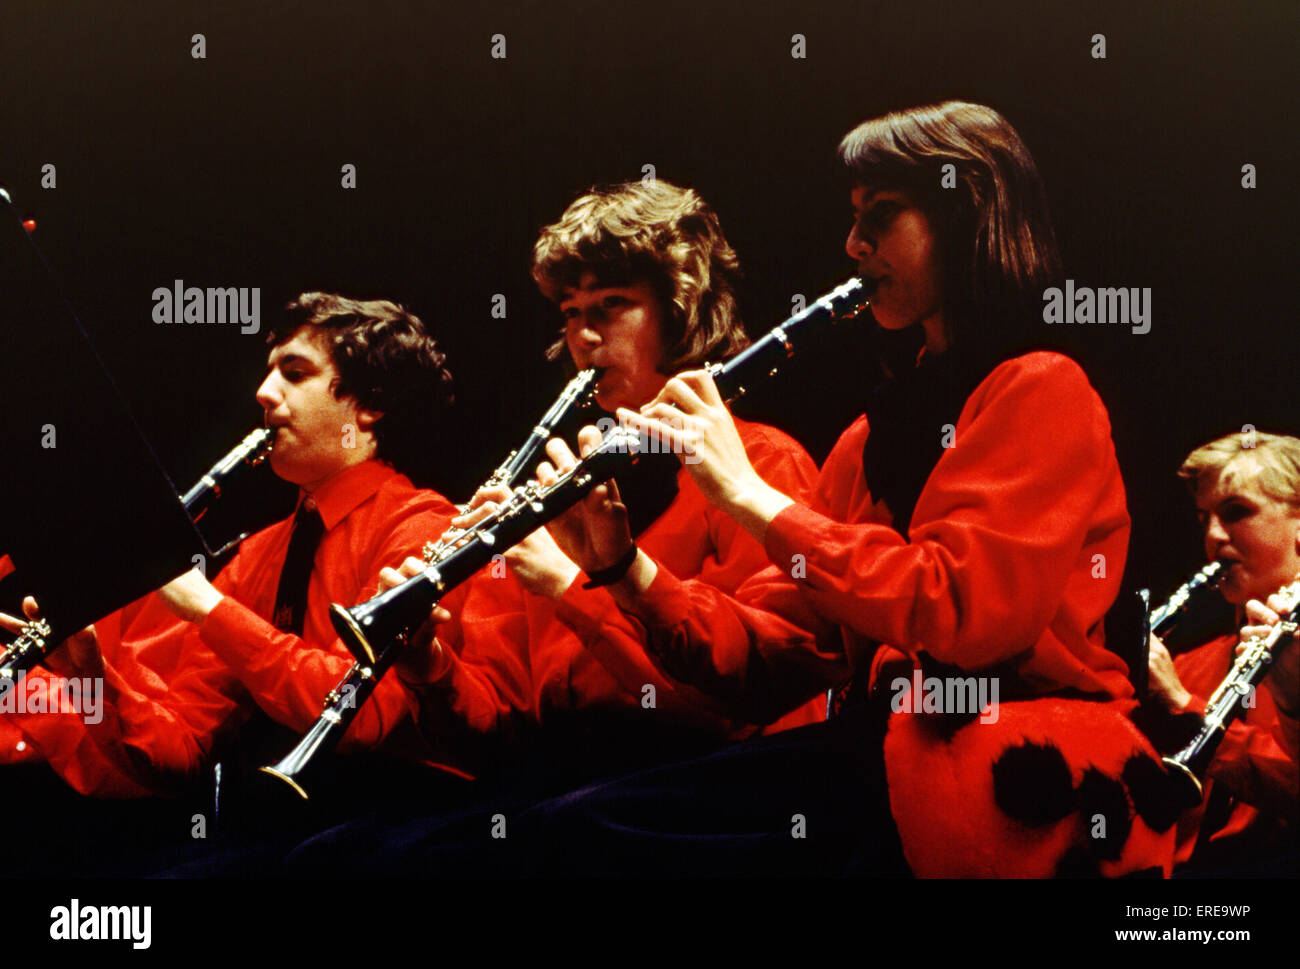 Girls playing clarinet in youth orchestra. all wearing red sweaters Stock Photo